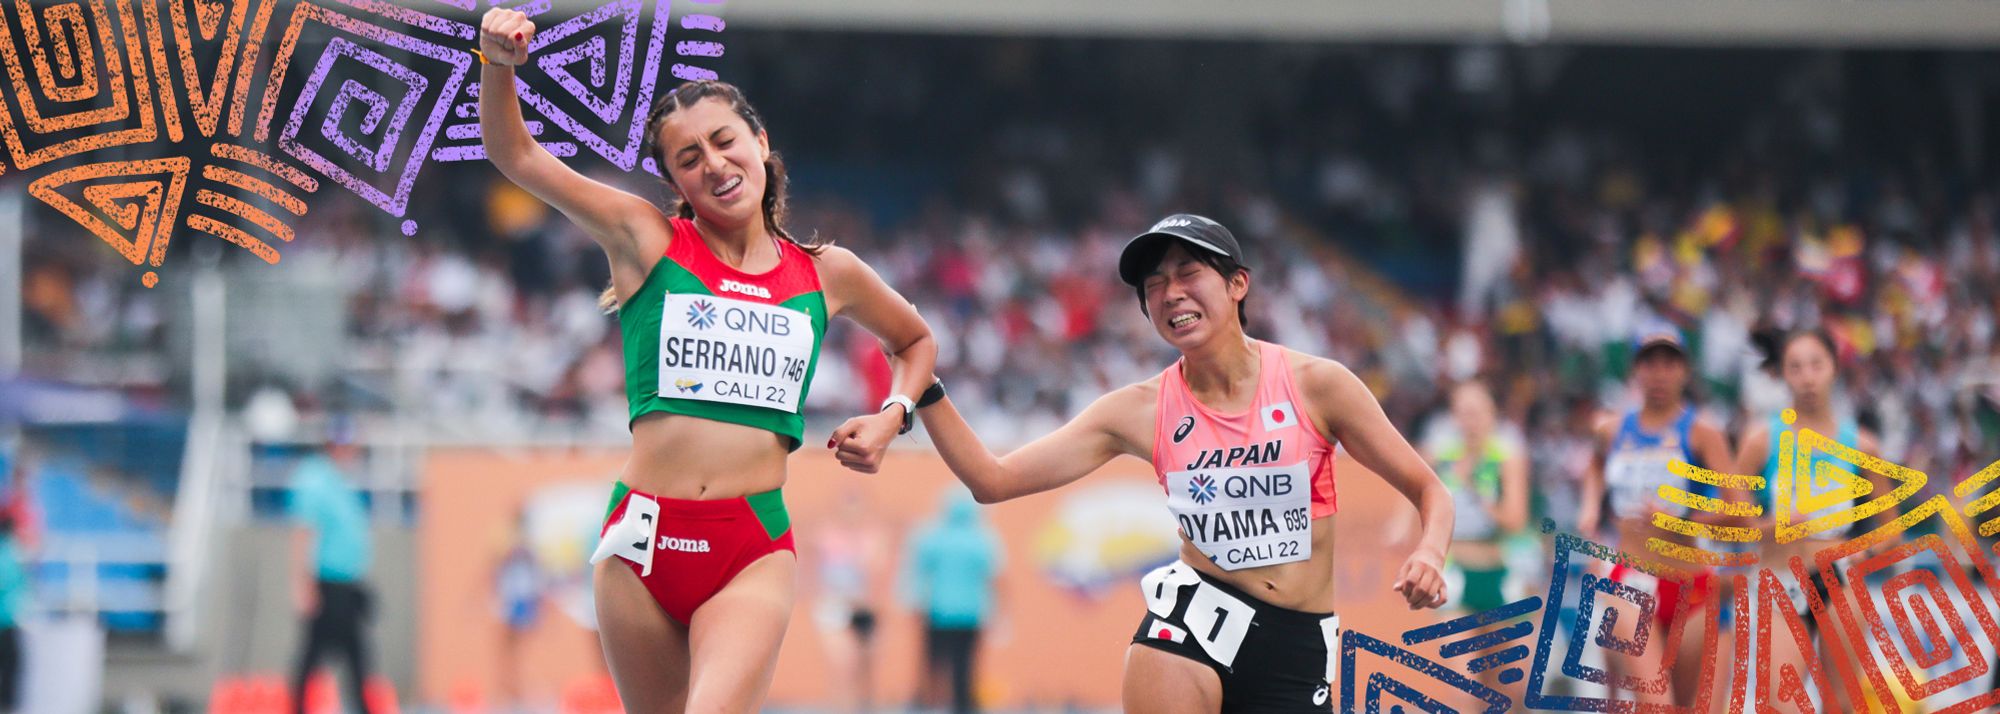 Two exhilarating finals ended with gold for Mexico's Karla Ximena Serrano and Mazlum Demir of Turkey